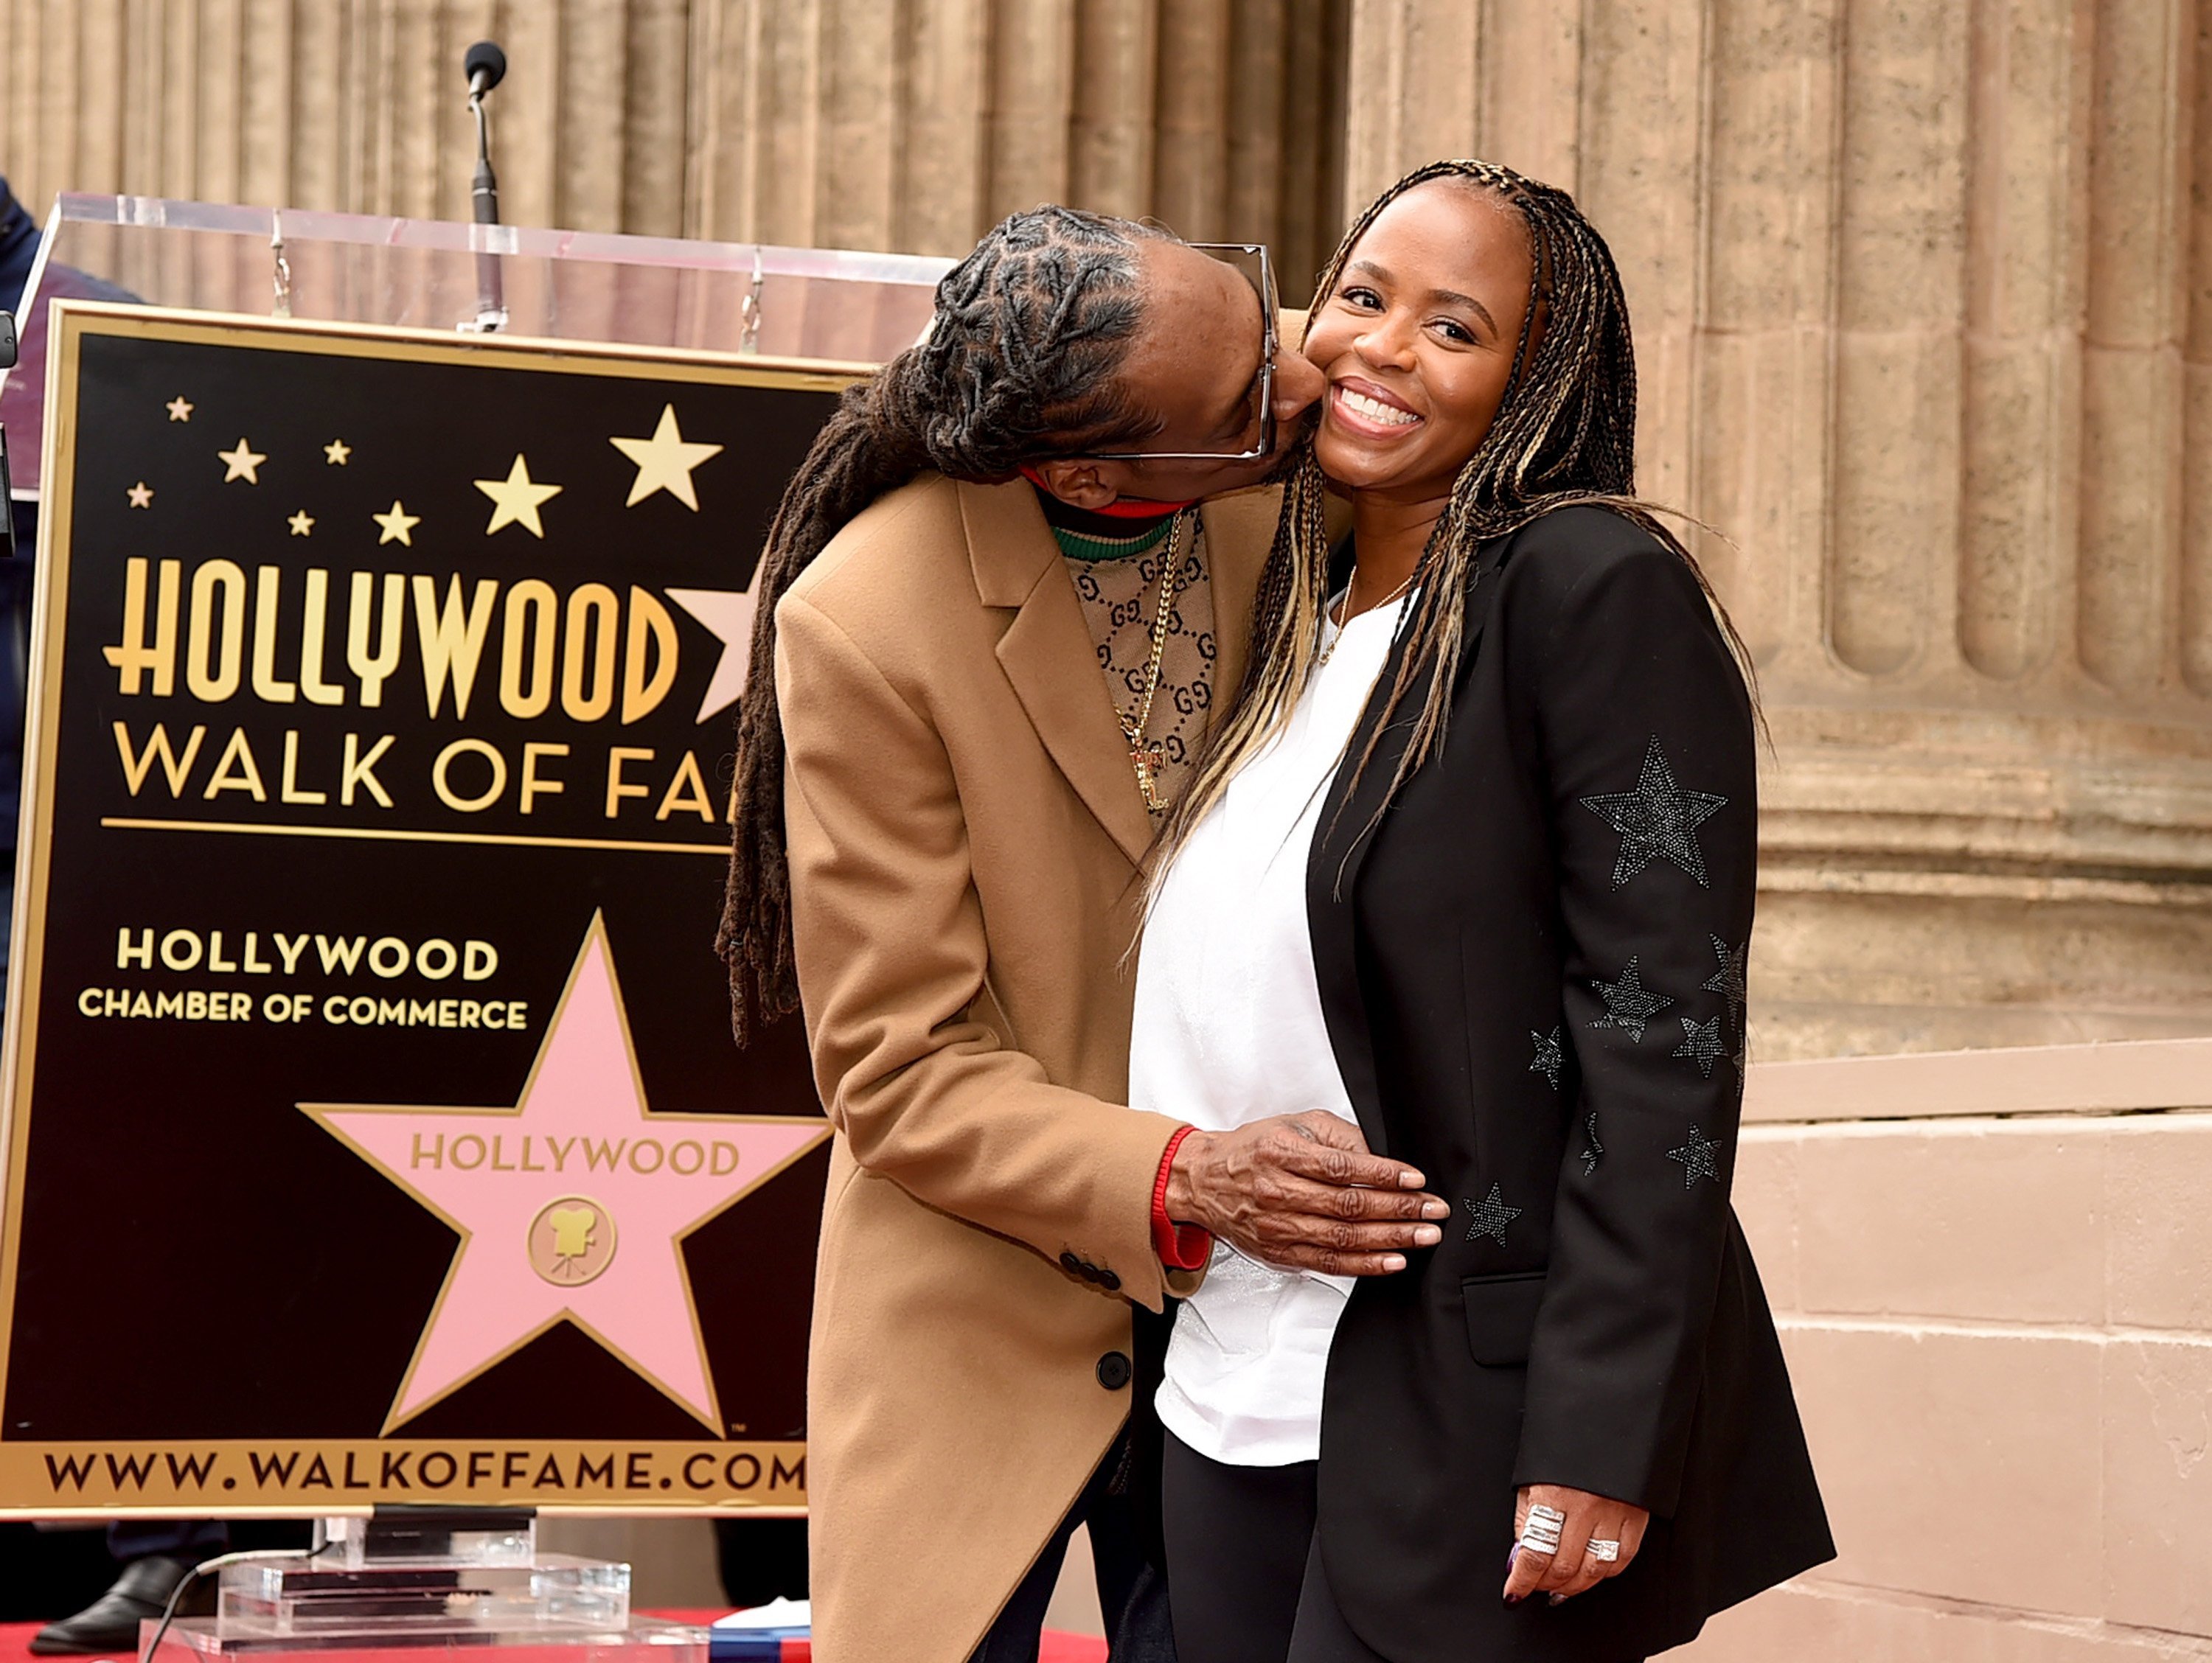 Snoop Dogg, with his wife Shante Broadus, as he is honored with a star on The Hollywood Walk of Fame on Nov. 19, 2018 | Photo: Getty Images